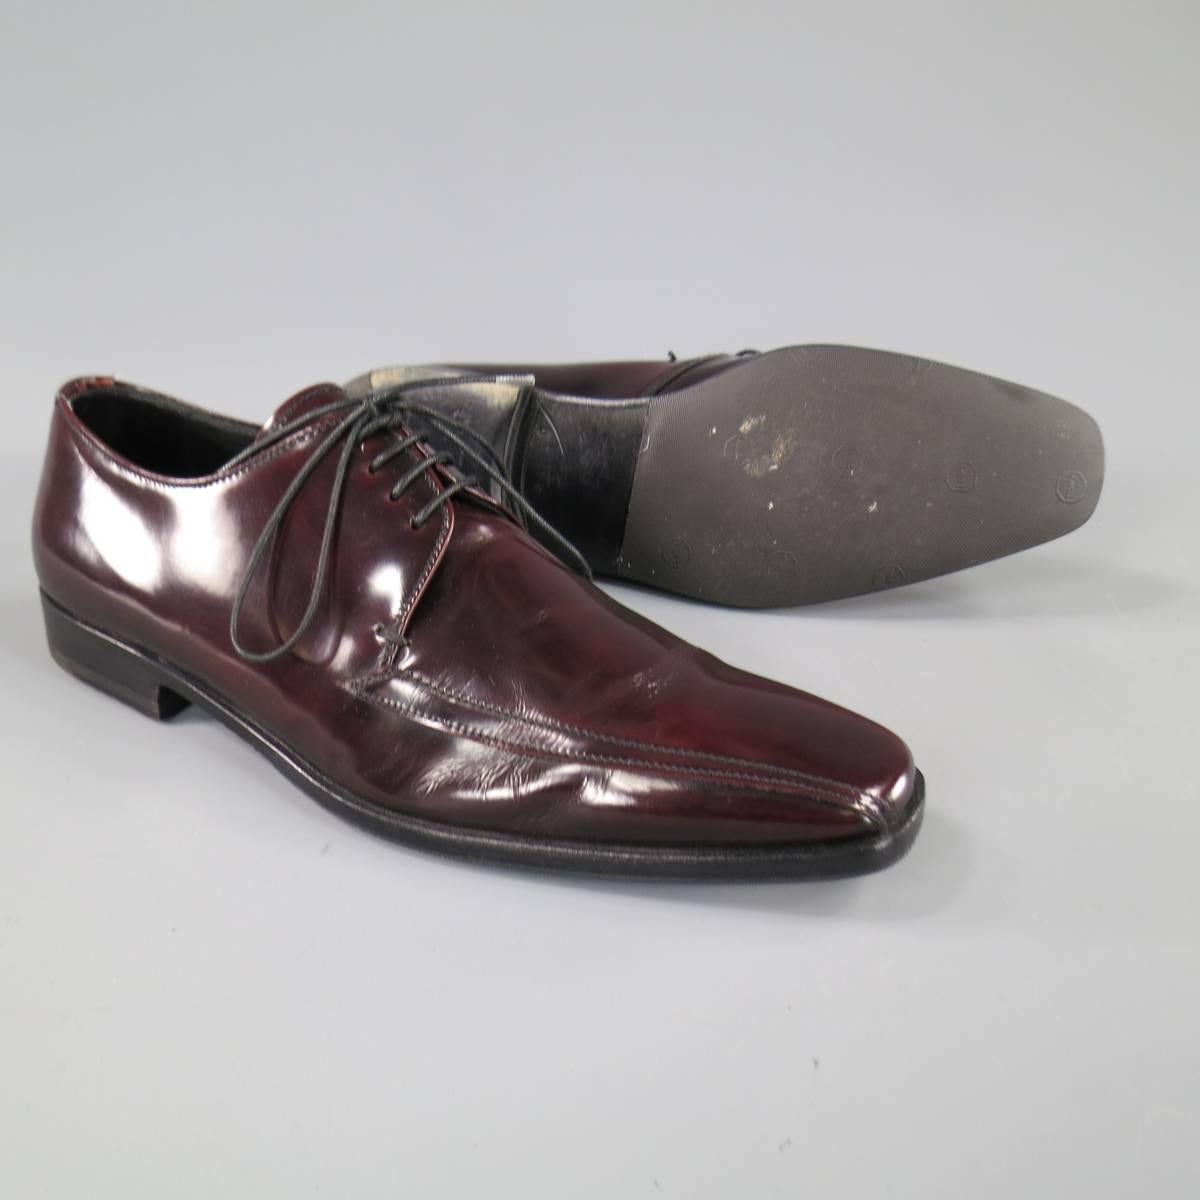 These chic PRADA dress shoes come in a rich oxblood burgundy red patent leather and feature a sleek pointed square toe with top stitching detail. Made in Italy.
 
Very Good Pre-Owned Condition.
Marked: 6
 
Measurements:
 
Length: 12